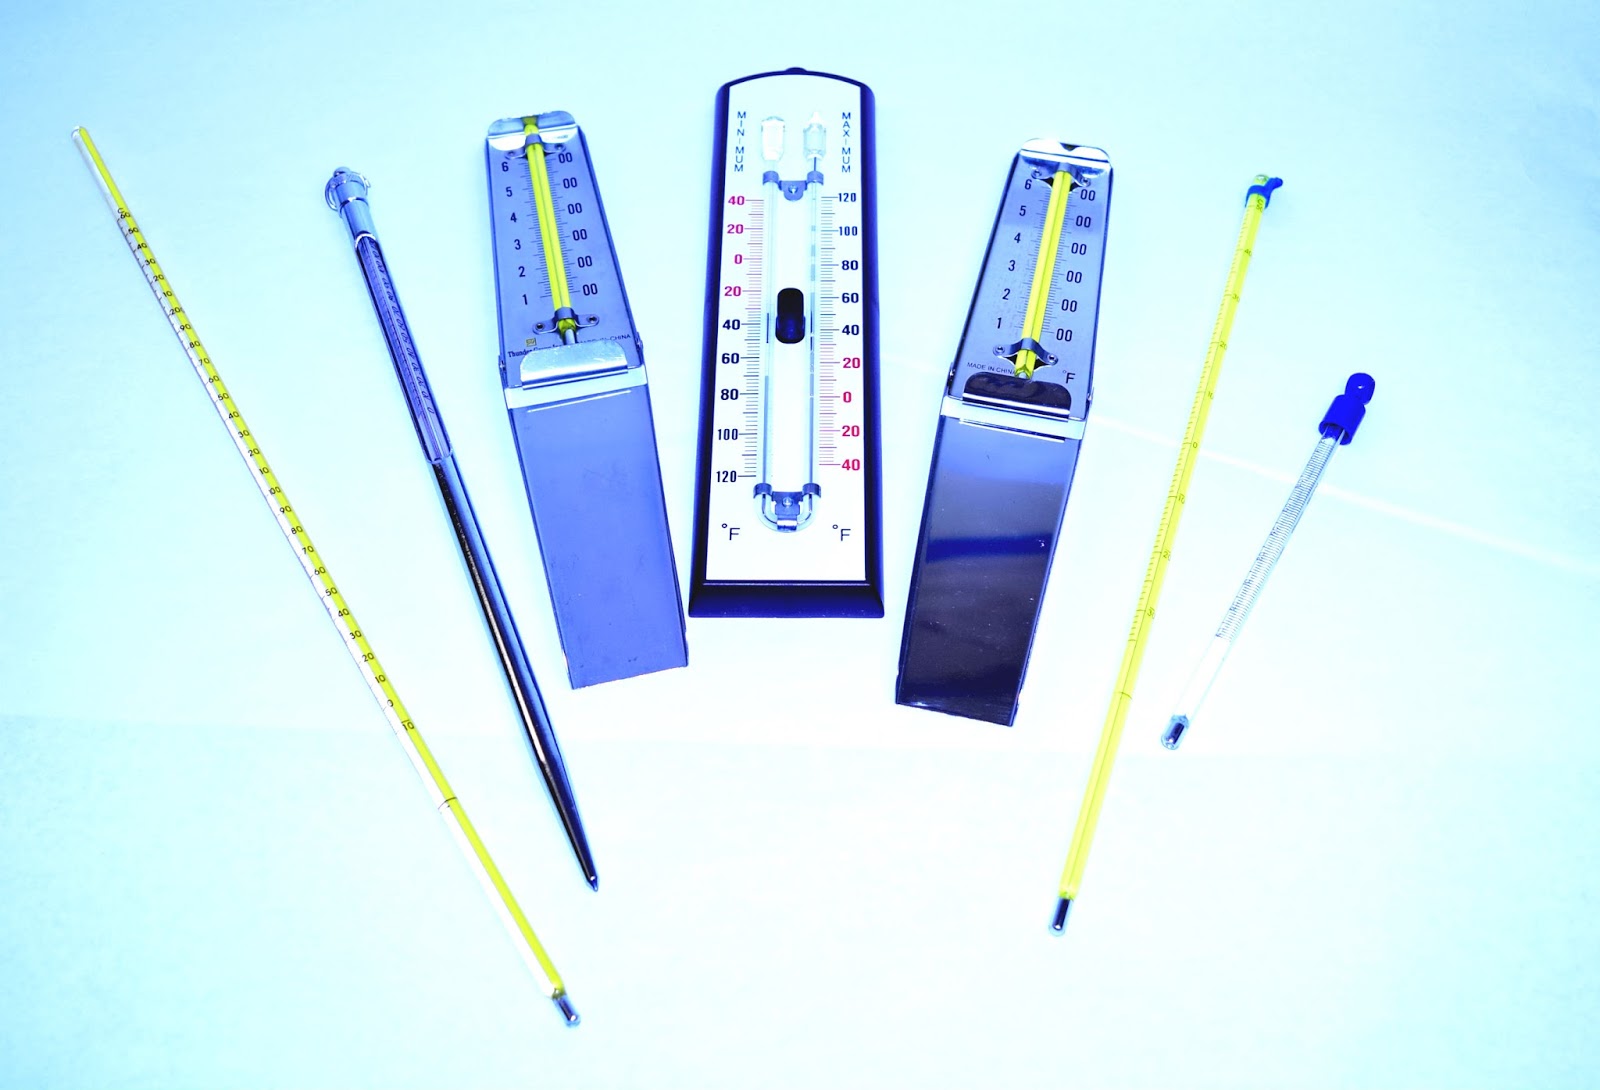 mercury instruments, all long fairly thin devices with numbers on the devices and clear materials, for measuring mercury.